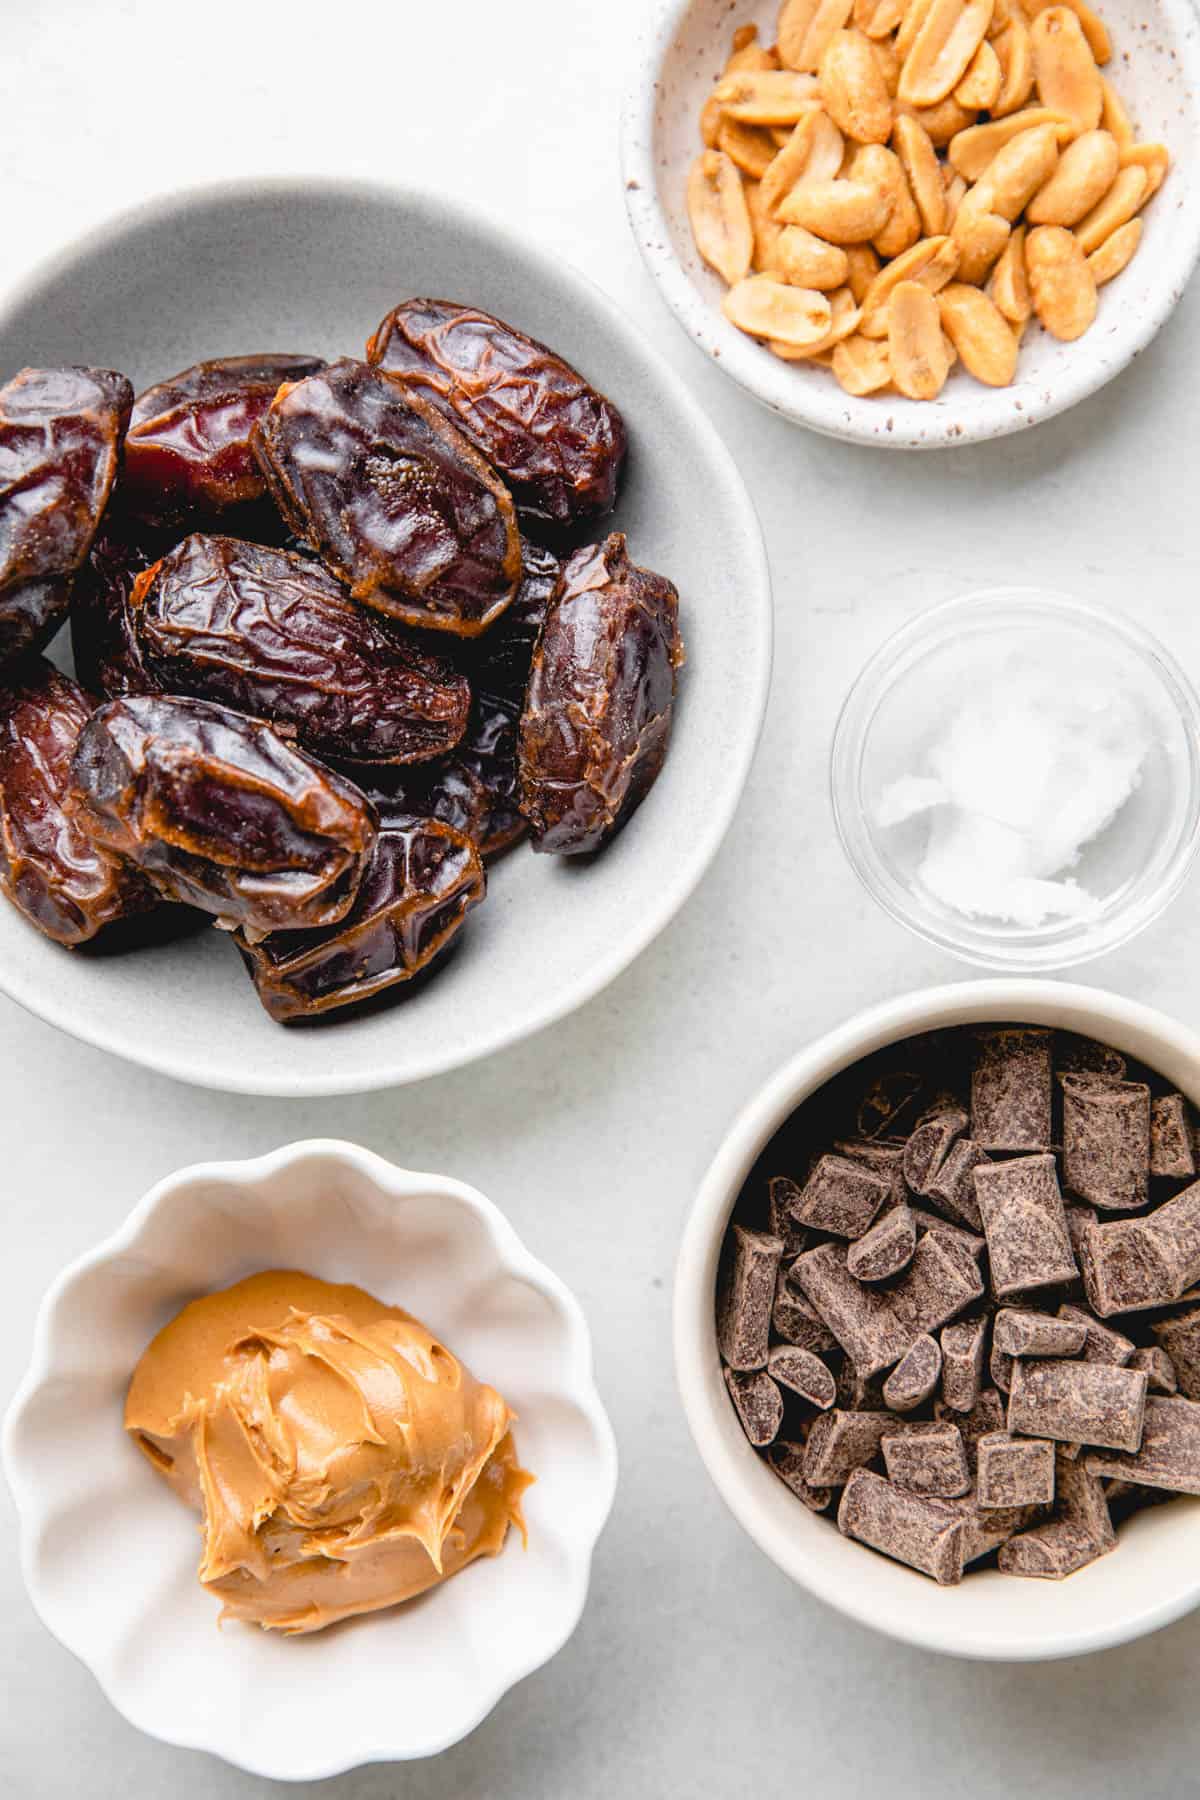 Separate ingredients to make chocolate covered dates.